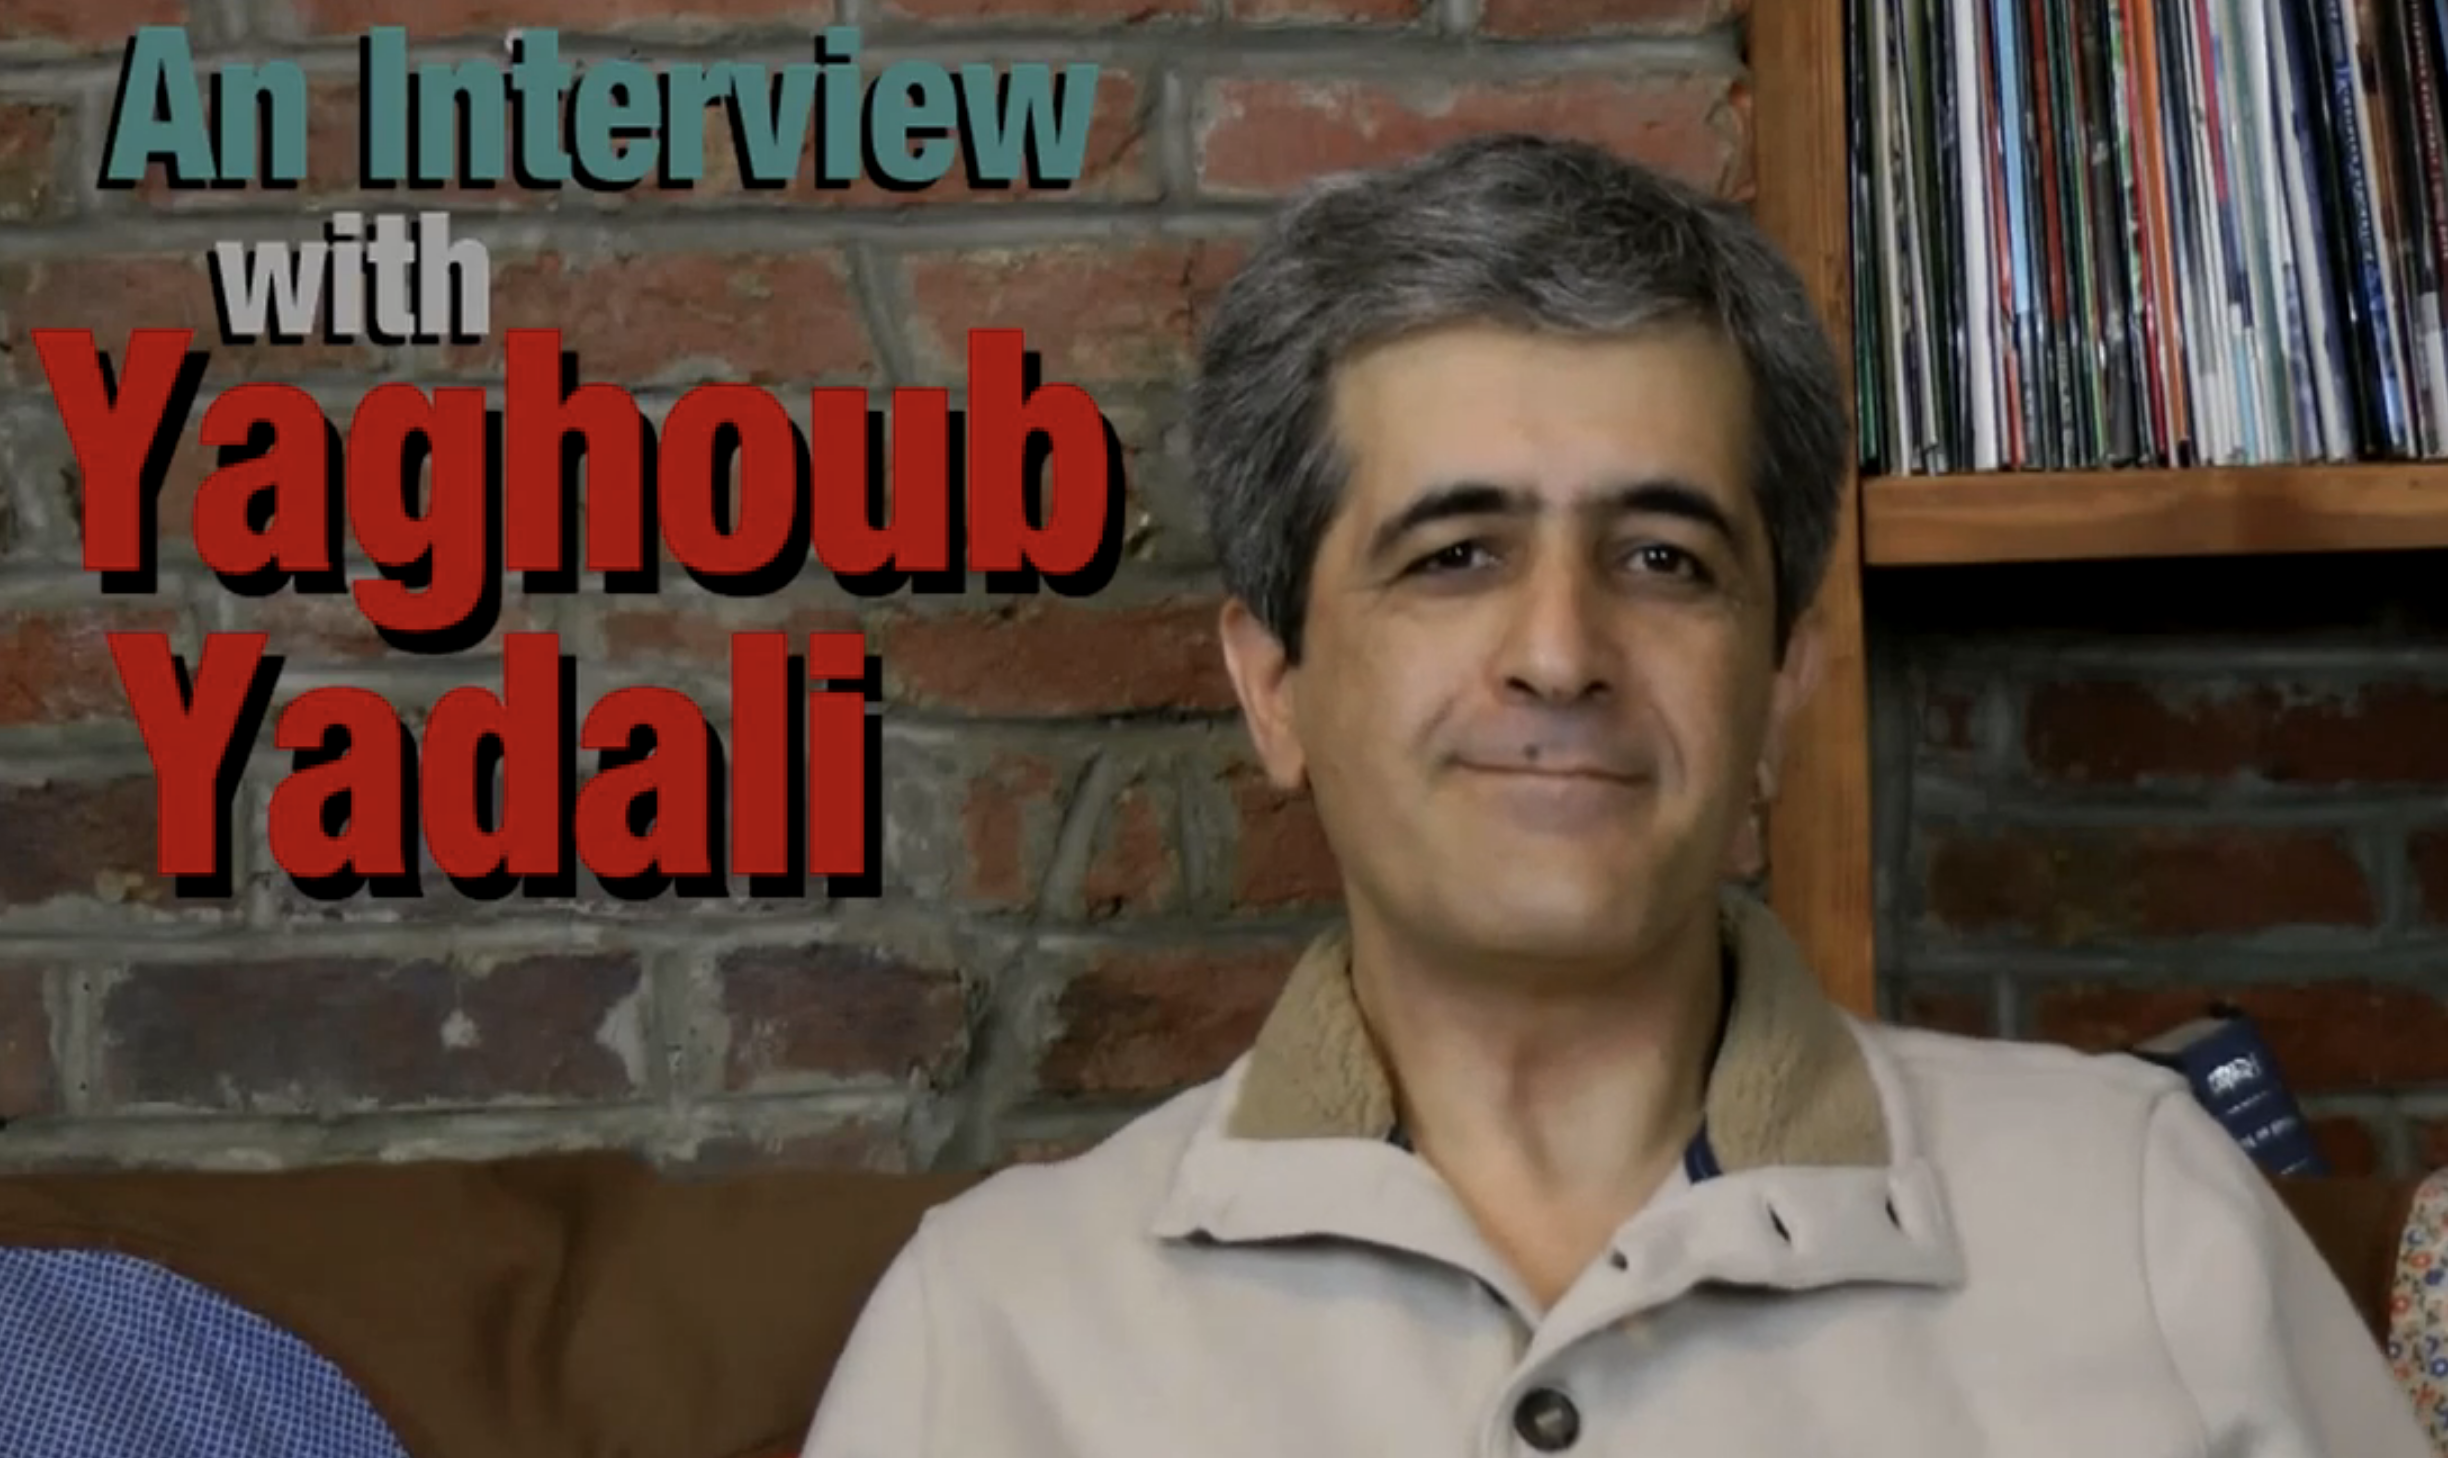 The Writer’s Block: A Video Q&A with Yaghoub Yadali